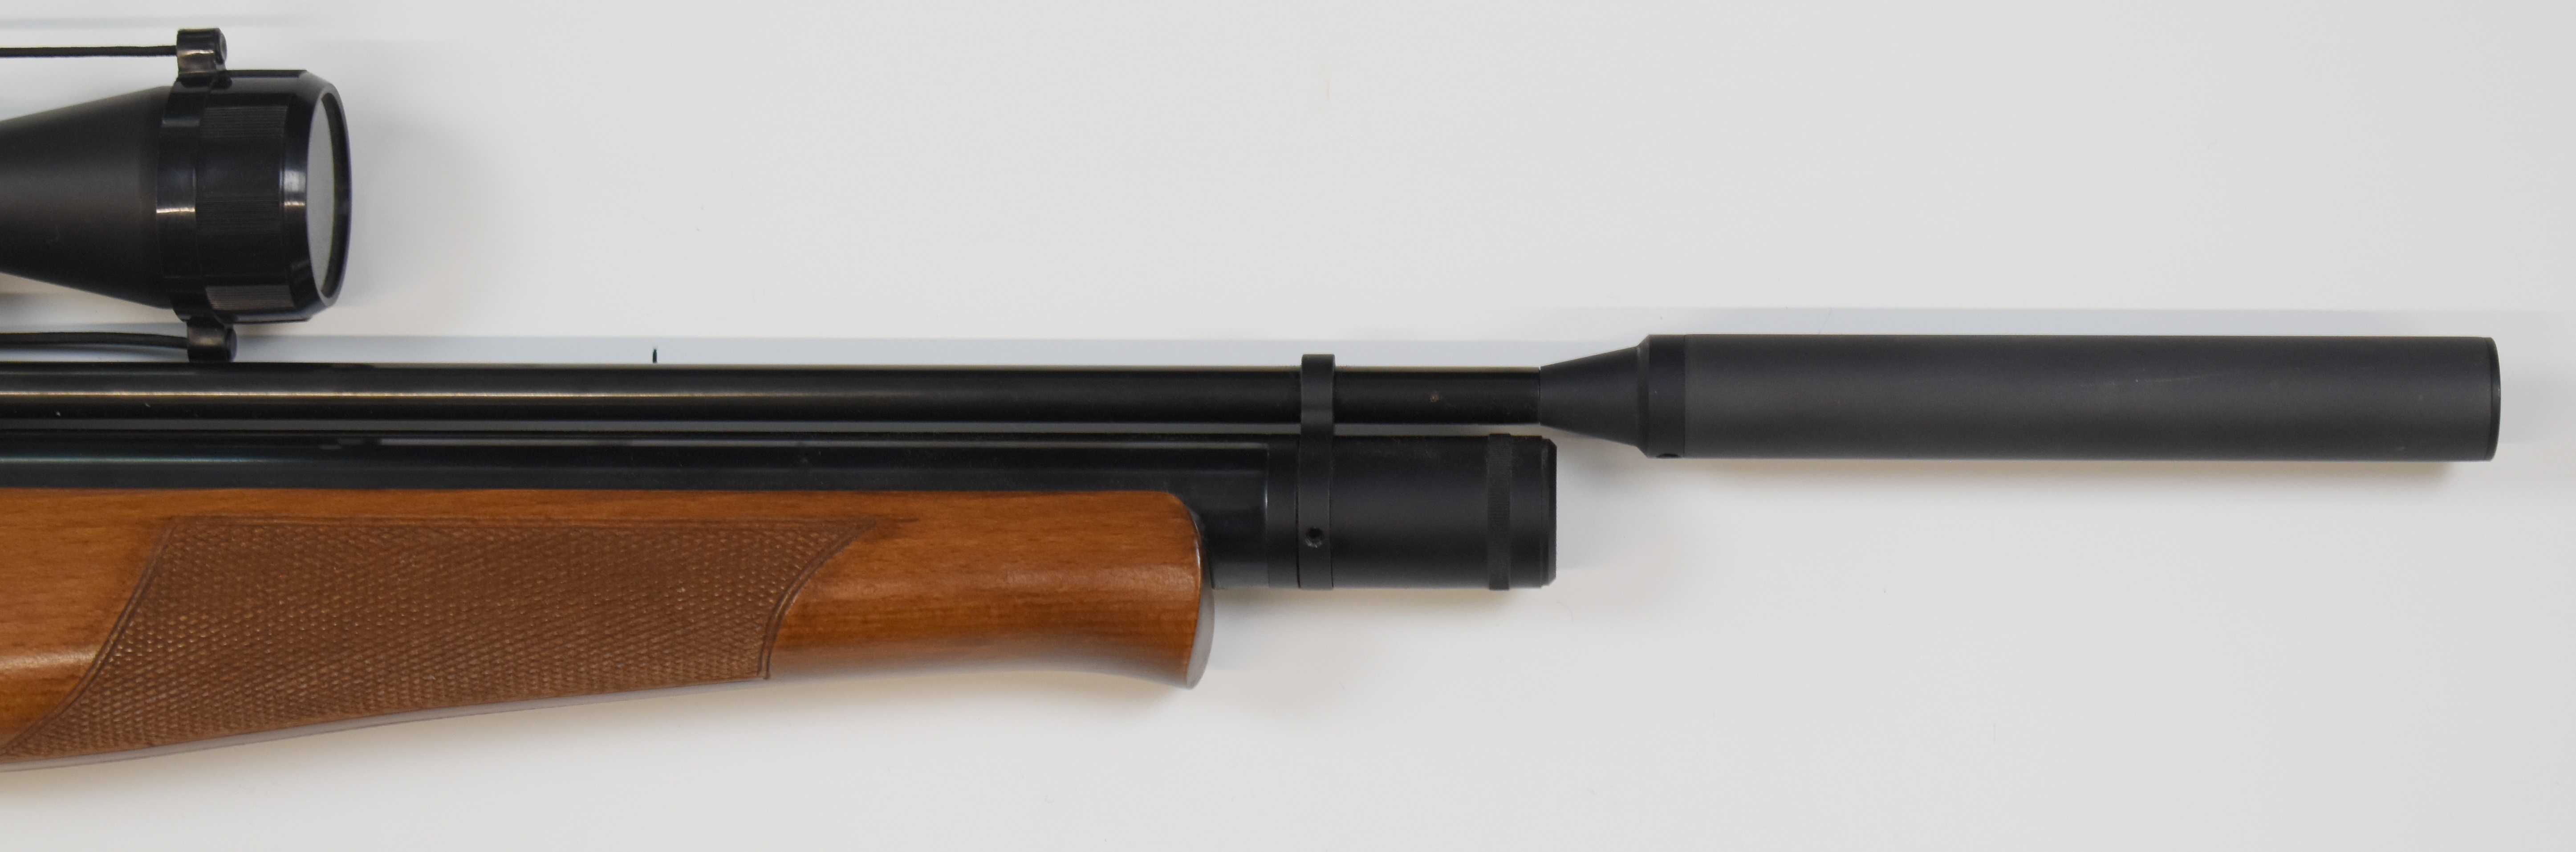 Air Arms S410 .22 PCP air rifle with chequered semi-pistol grip and forend, raised cheek piece, 10- - Image 5 of 11